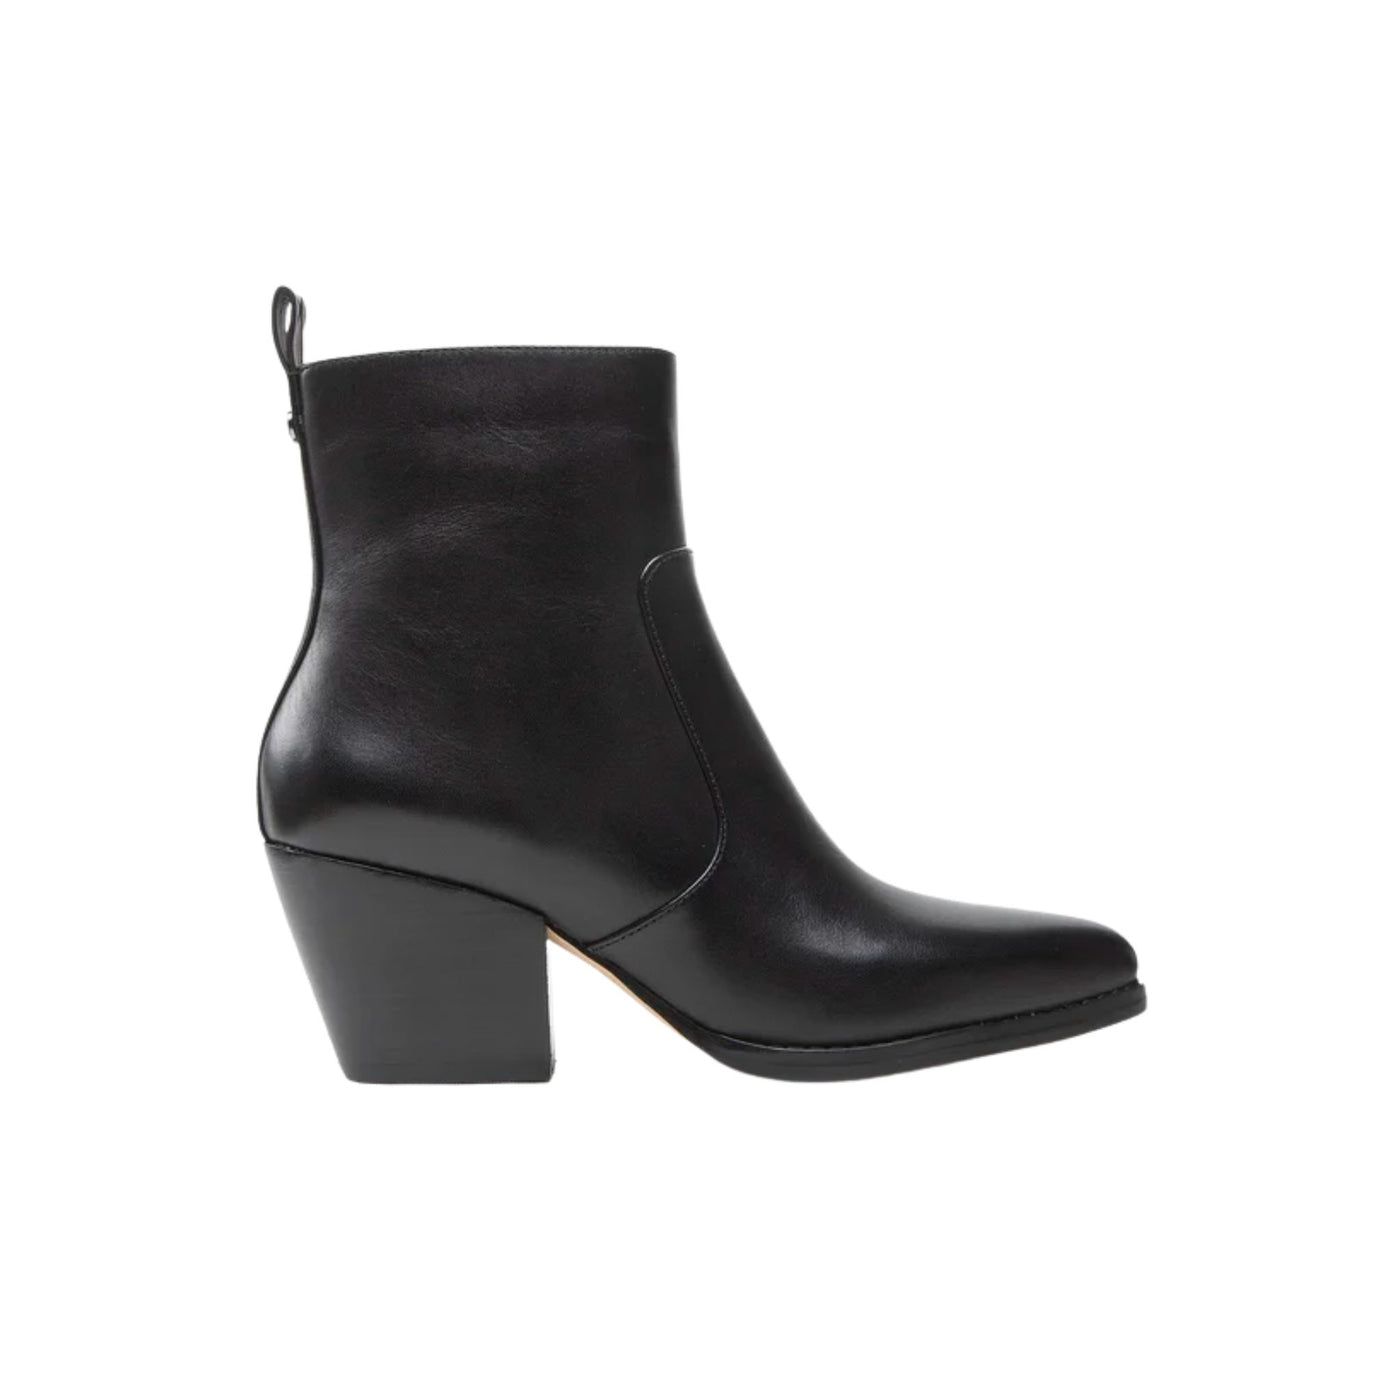 Women's ankle boot in leather